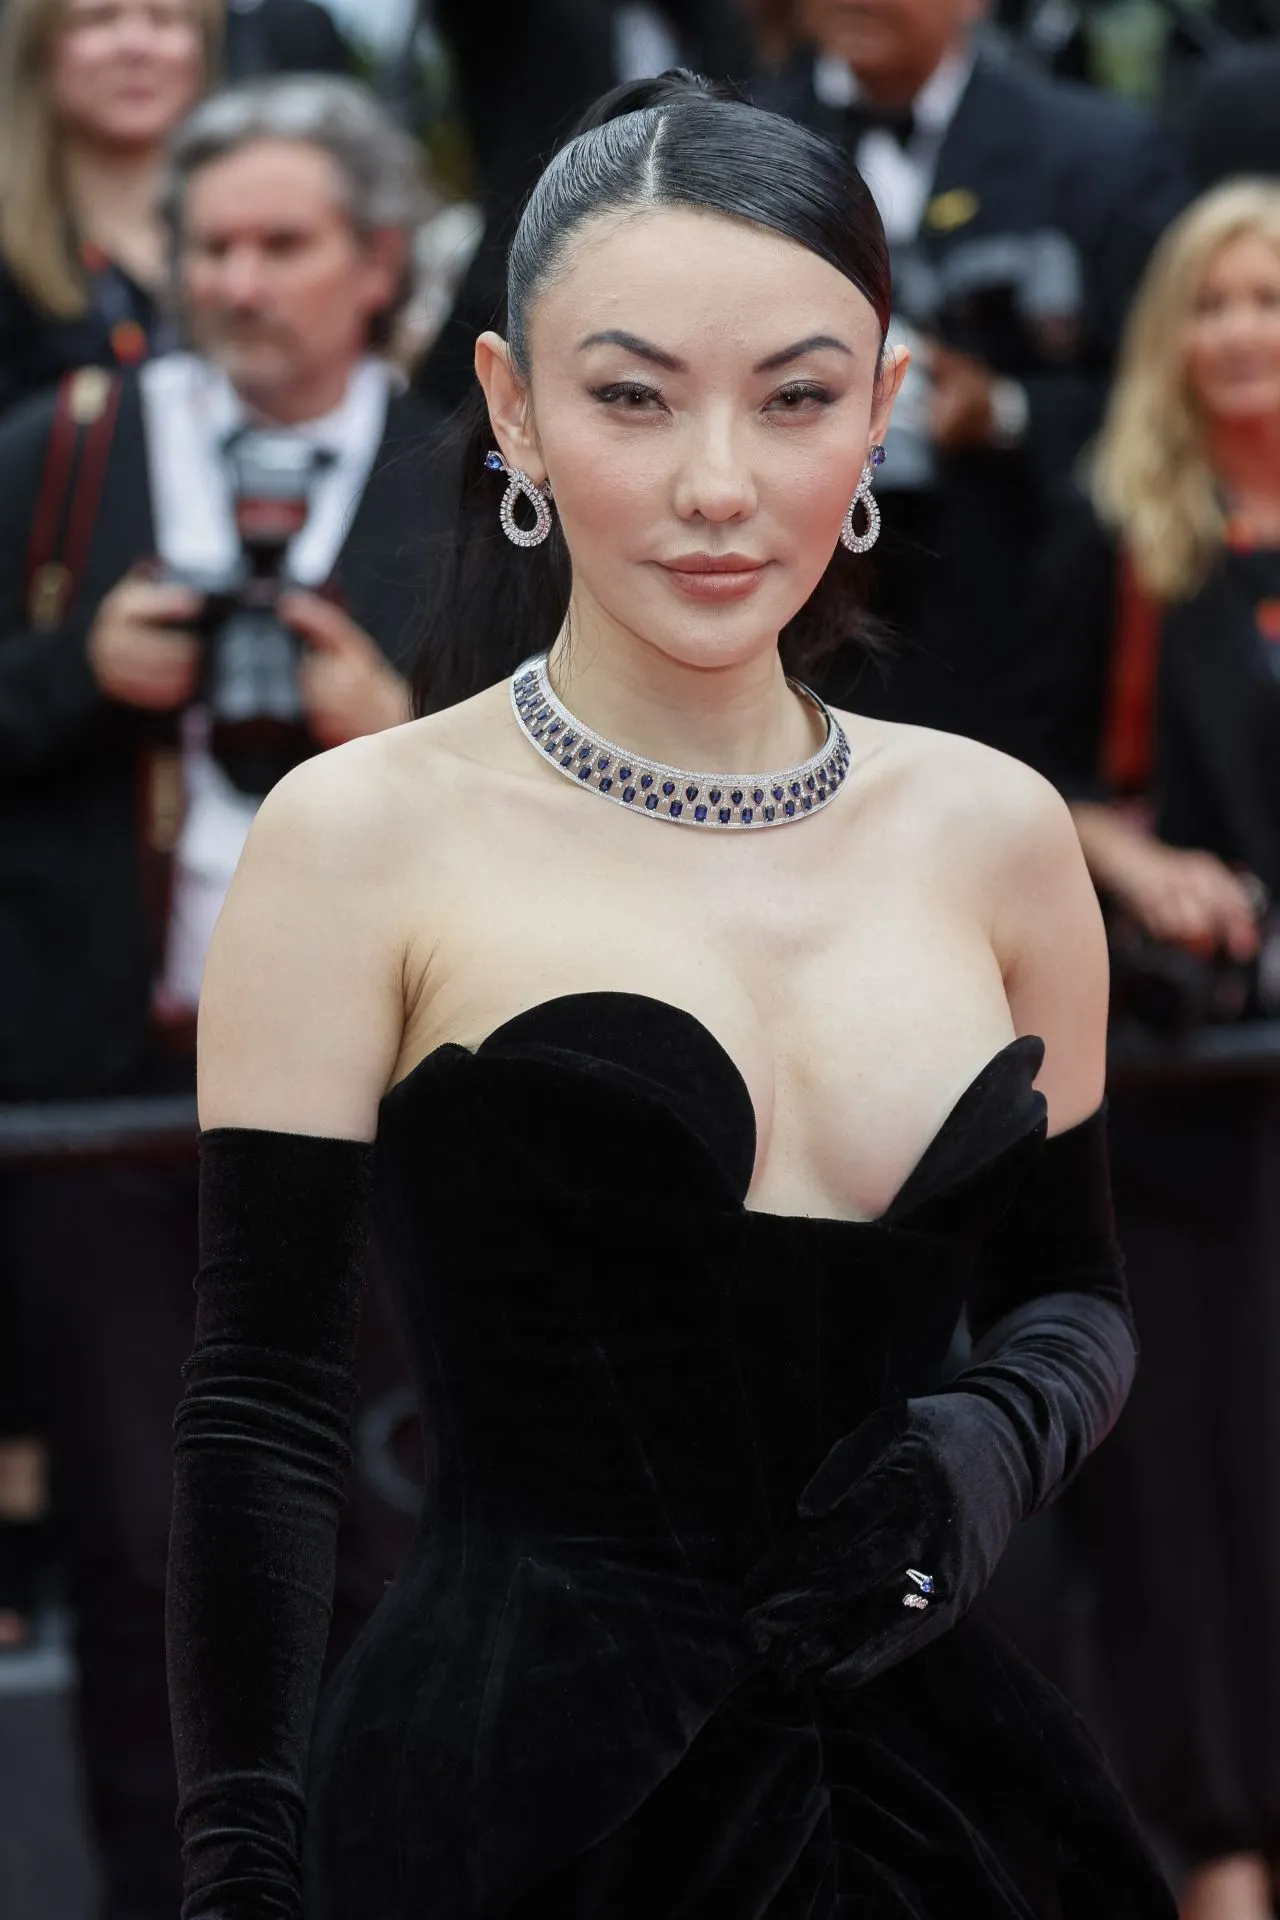 JESSICA WANG AT THE APPRENTICE PREMIERE AT CANNES FILM FESTIVAL3